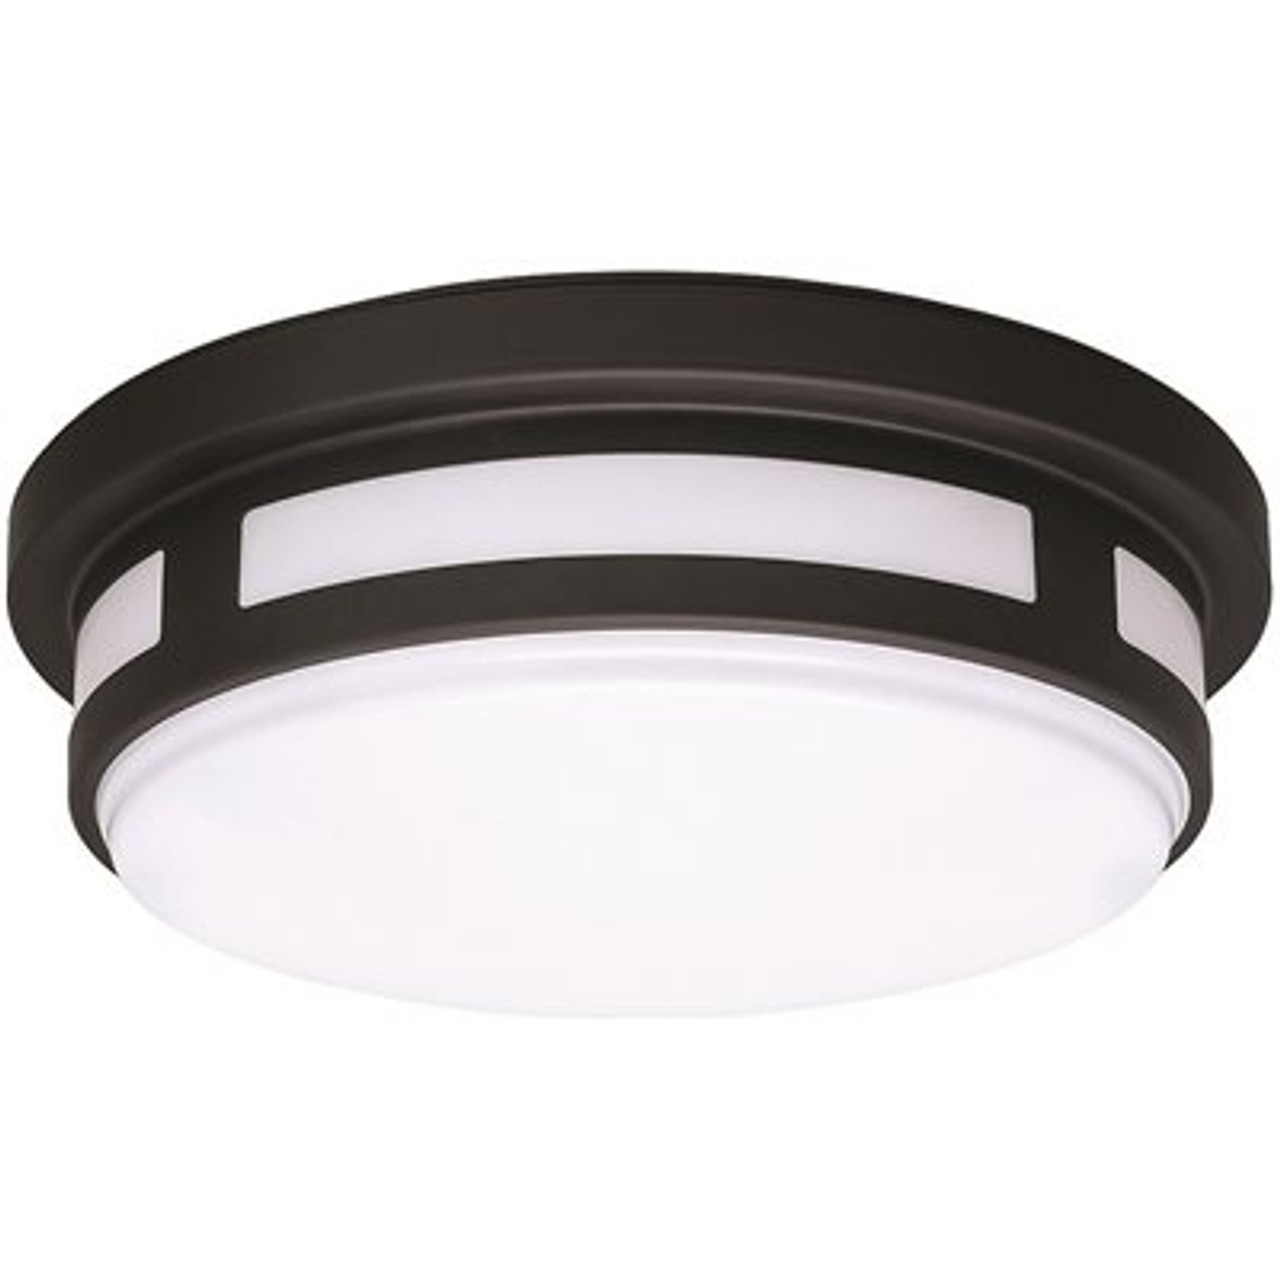 11 In. 1-Light Round Black Led Indoor Outdoor Flush Mount Ceiling Light Porch 830 Lumens 3 Color Temp Changes Wet Rated